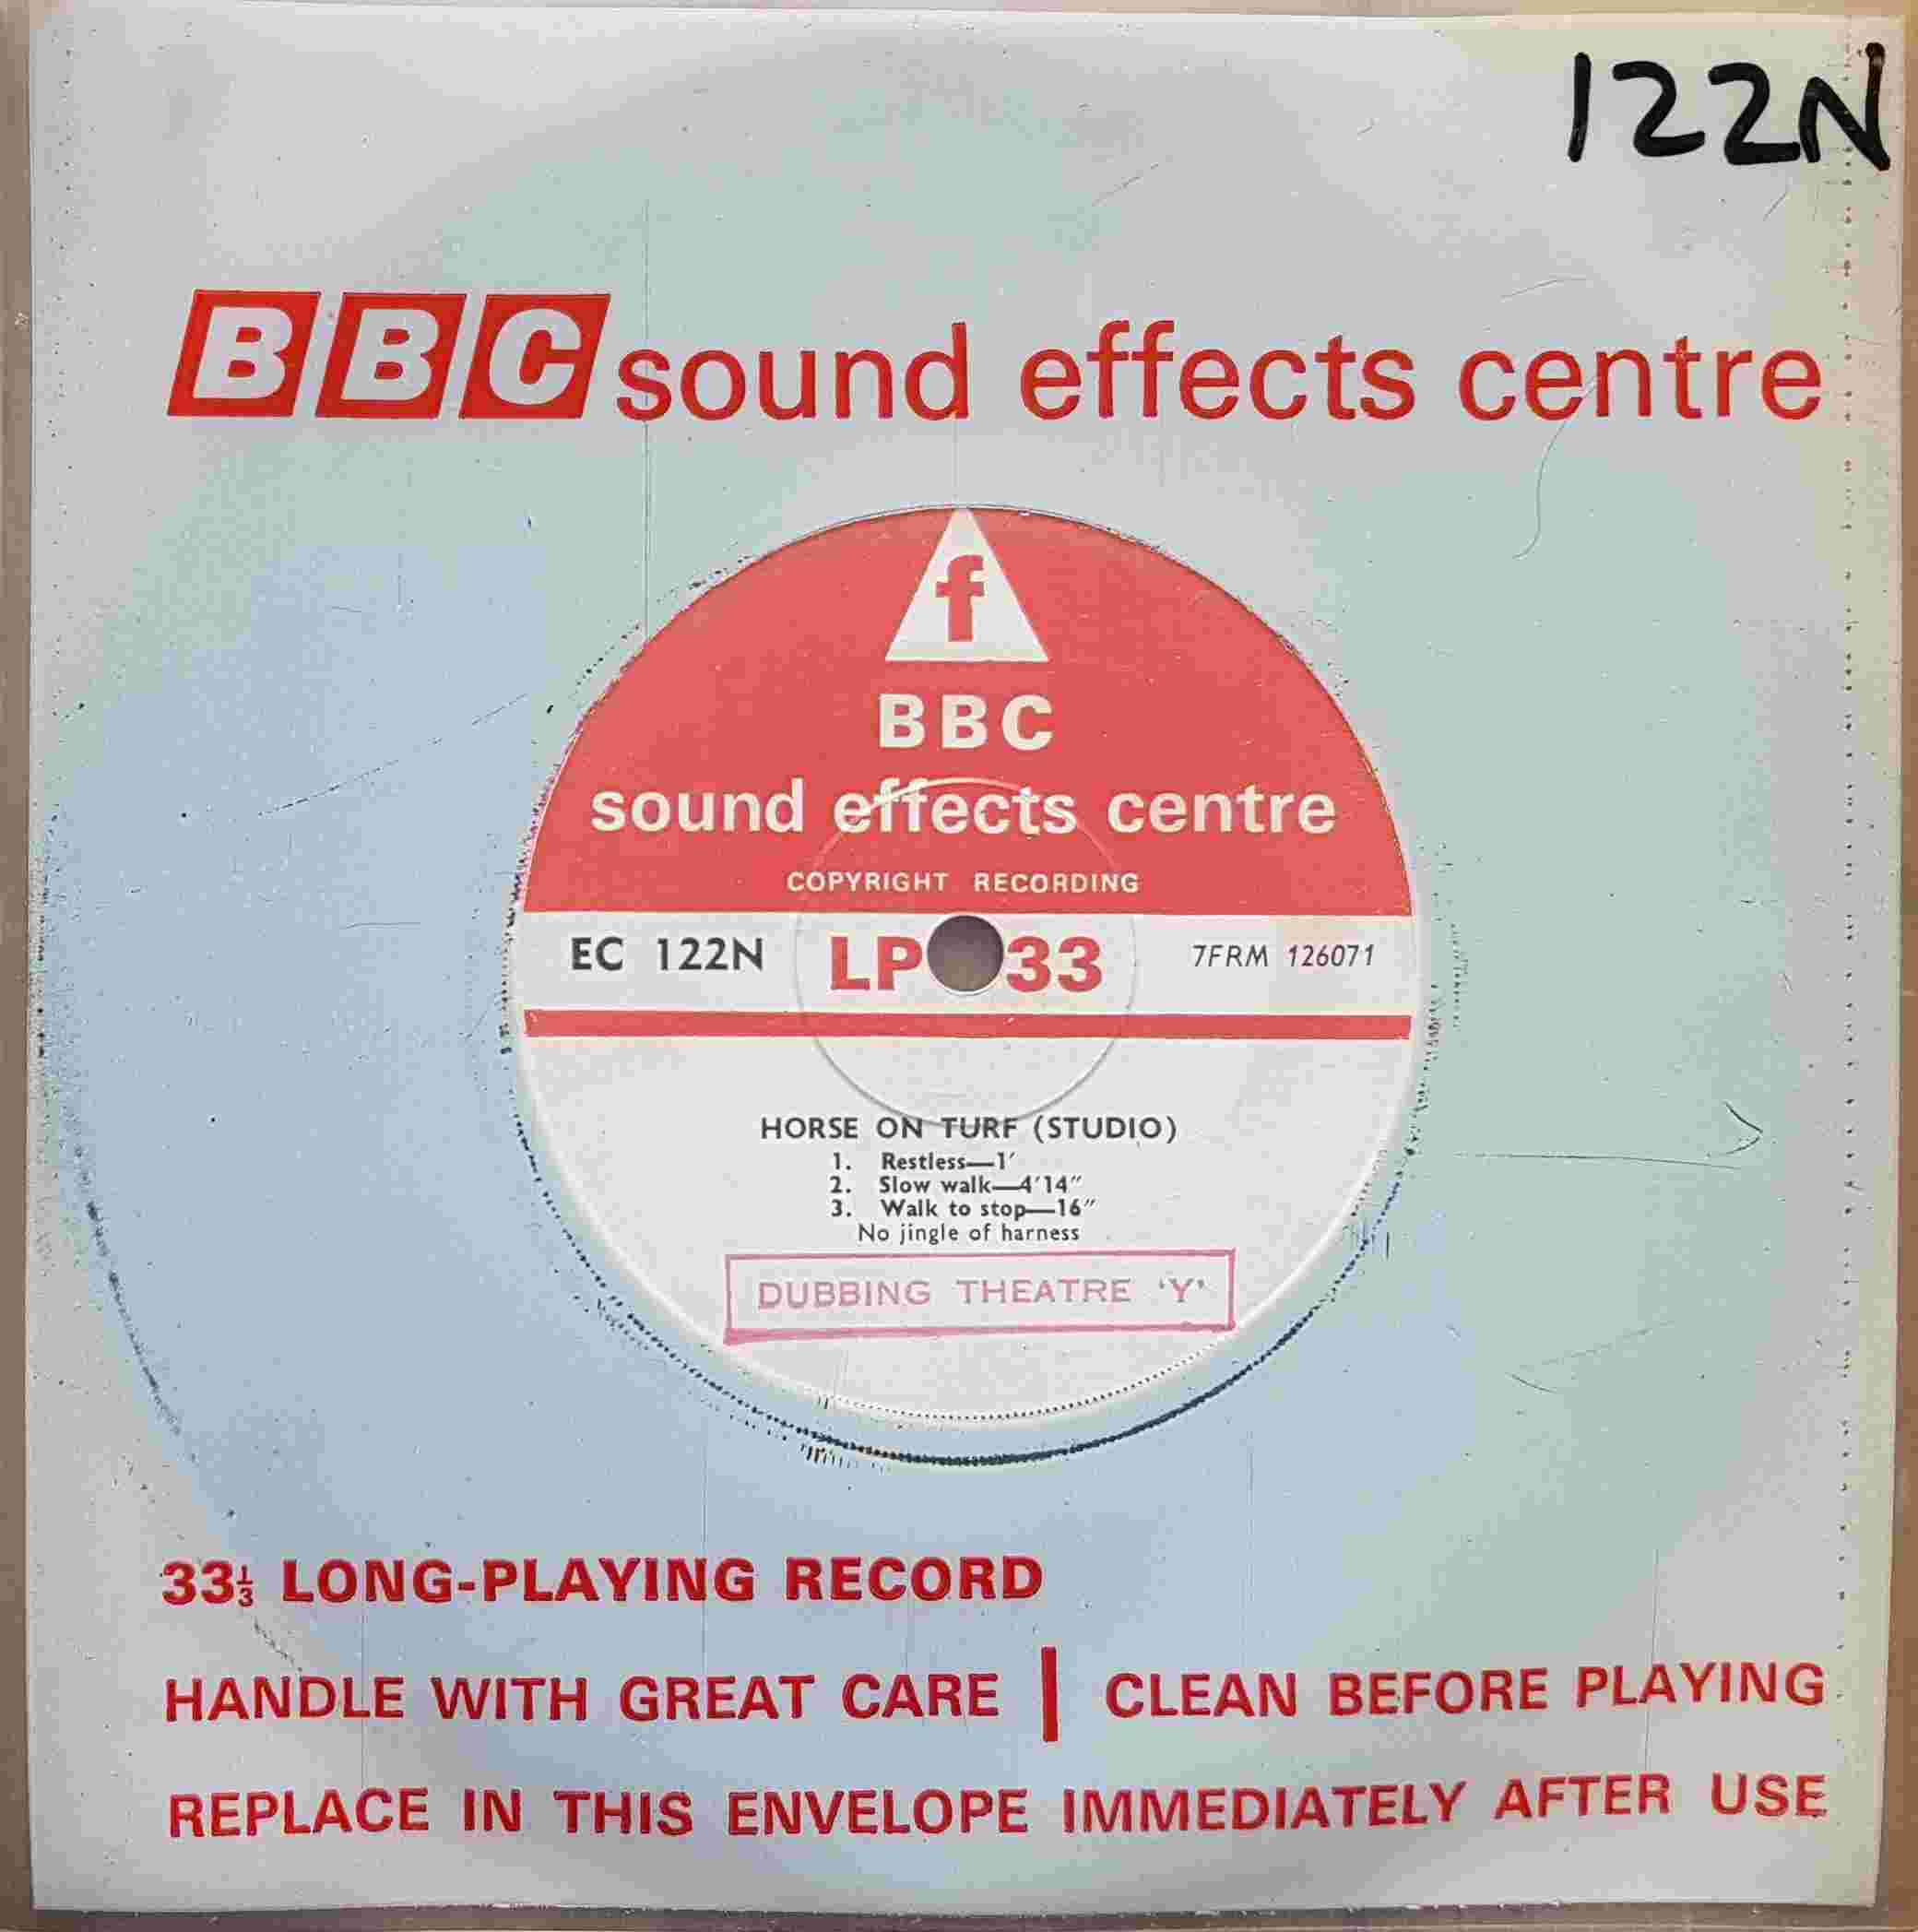 Picture of EC 122N Horse on turf (Studio) - No jingle or harness by artist Not registered from the BBC records and Tapes library